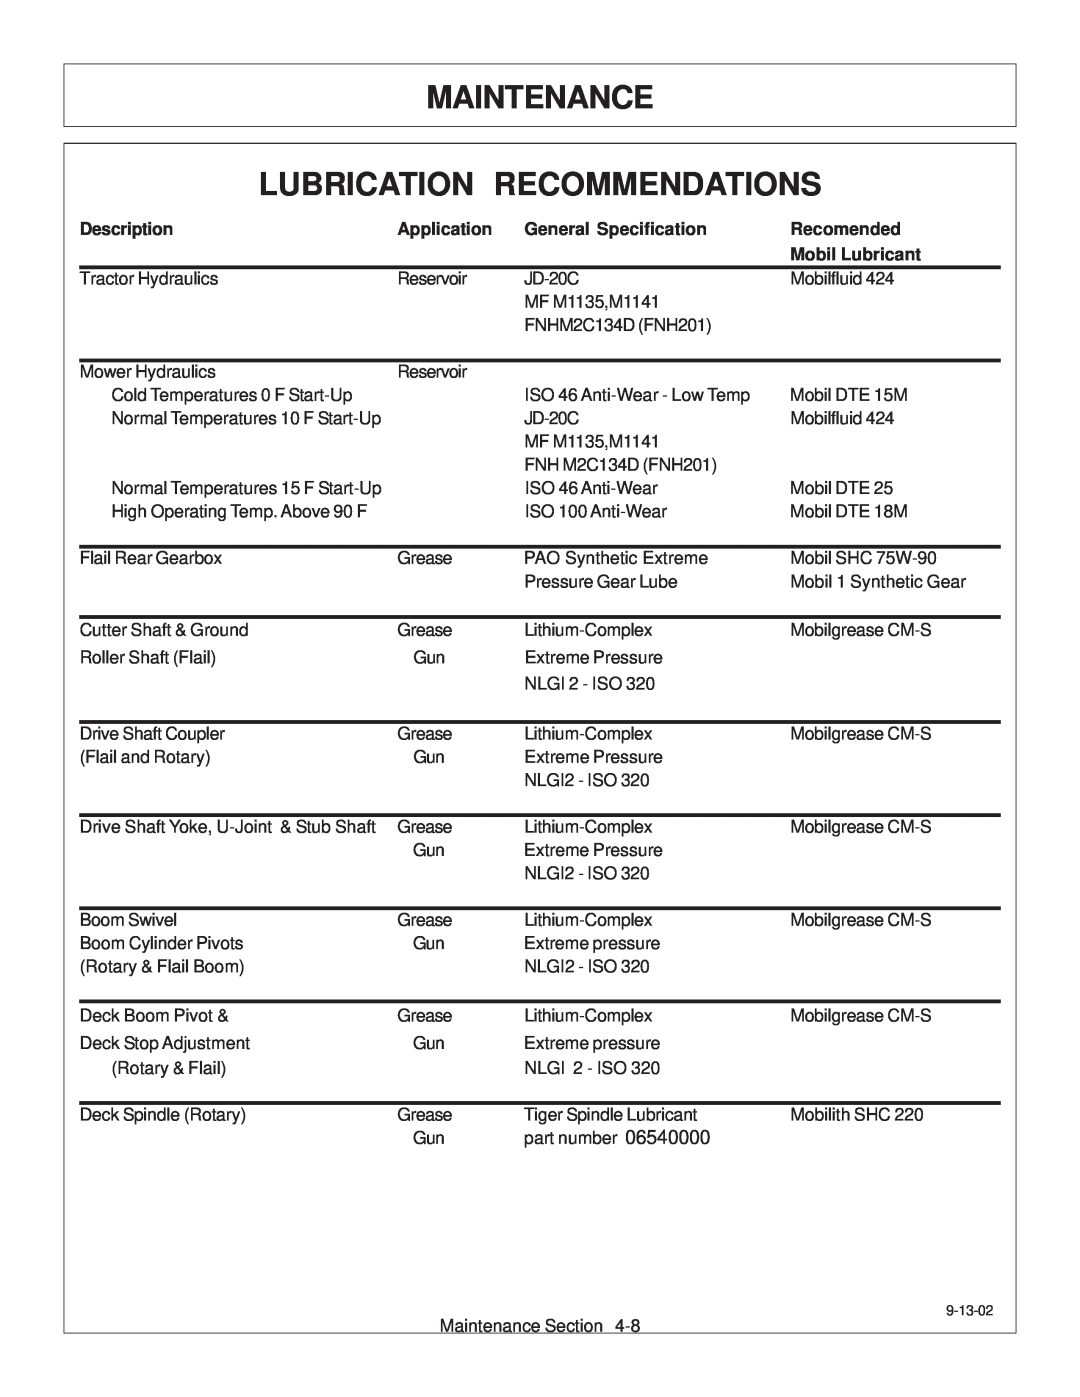 Tiger Products Co., Ltd TS 100A Maintenance Lubrication Recommendations, Description, Application, General Specification 